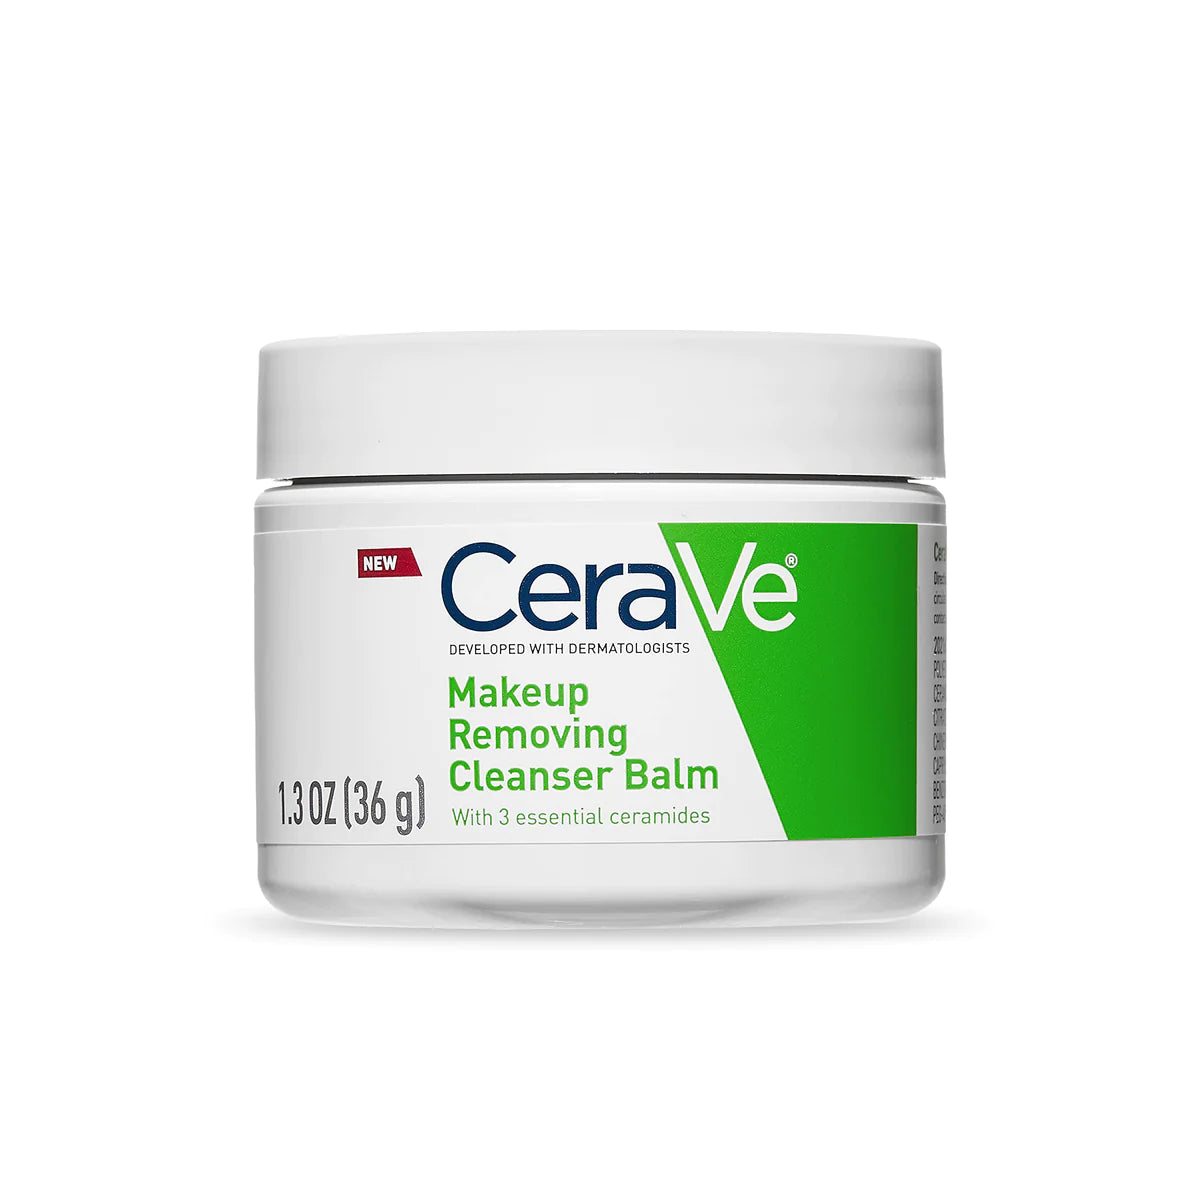 Cerave Makeup Remover Cleansing Balm